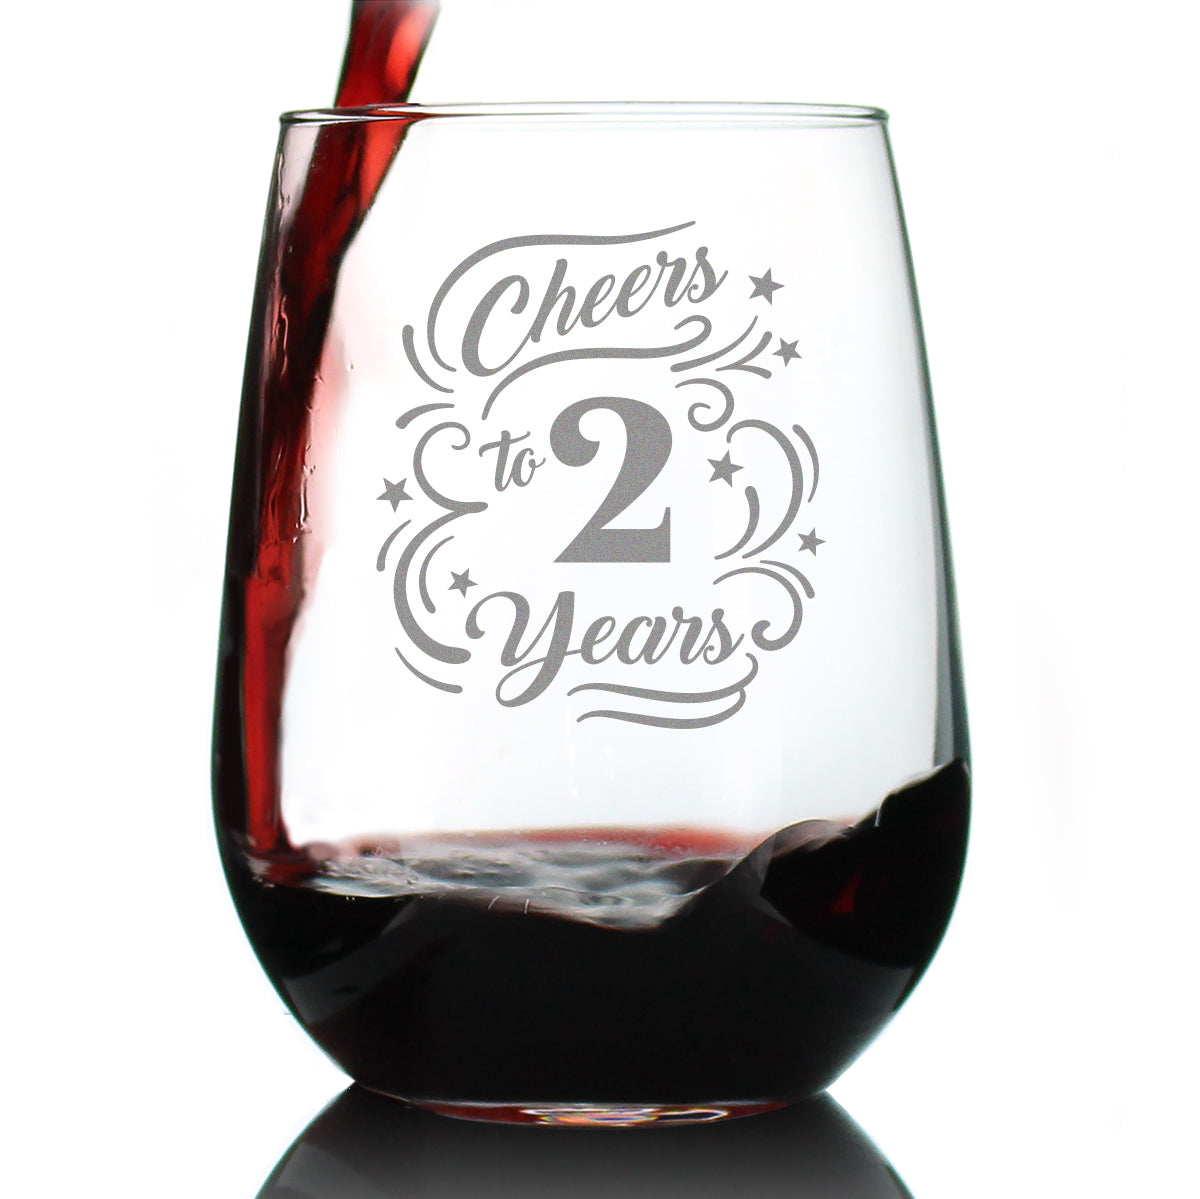 Cheers to 2 Years - Stemless Wine Glass Gifts for Women & Men - 2nd Anniversary Party Decor - Large 17 Oz Glasses